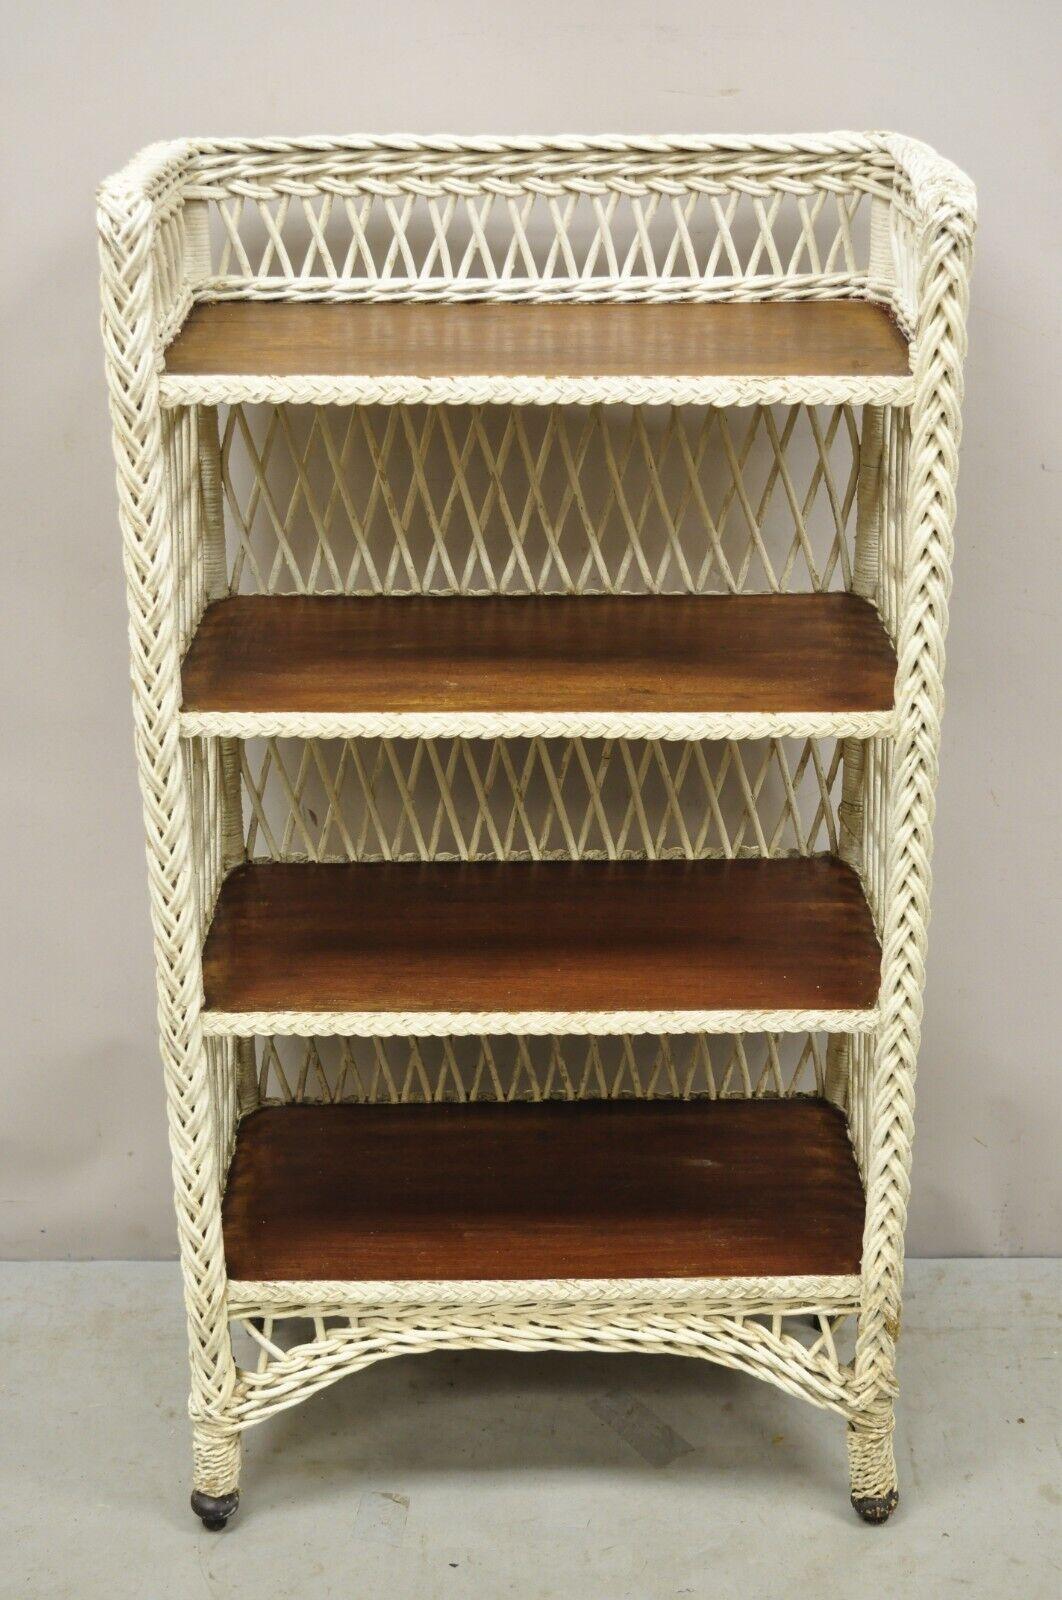 Antique American Victorian White Wicker 5 Shelf Bookcase Curio Display. Item features a white painted wicker frame, 4 wooden shelves, very nice antique item, quality American craftsmanship, great style and form. Circa Early 1900s. Measurements: 48